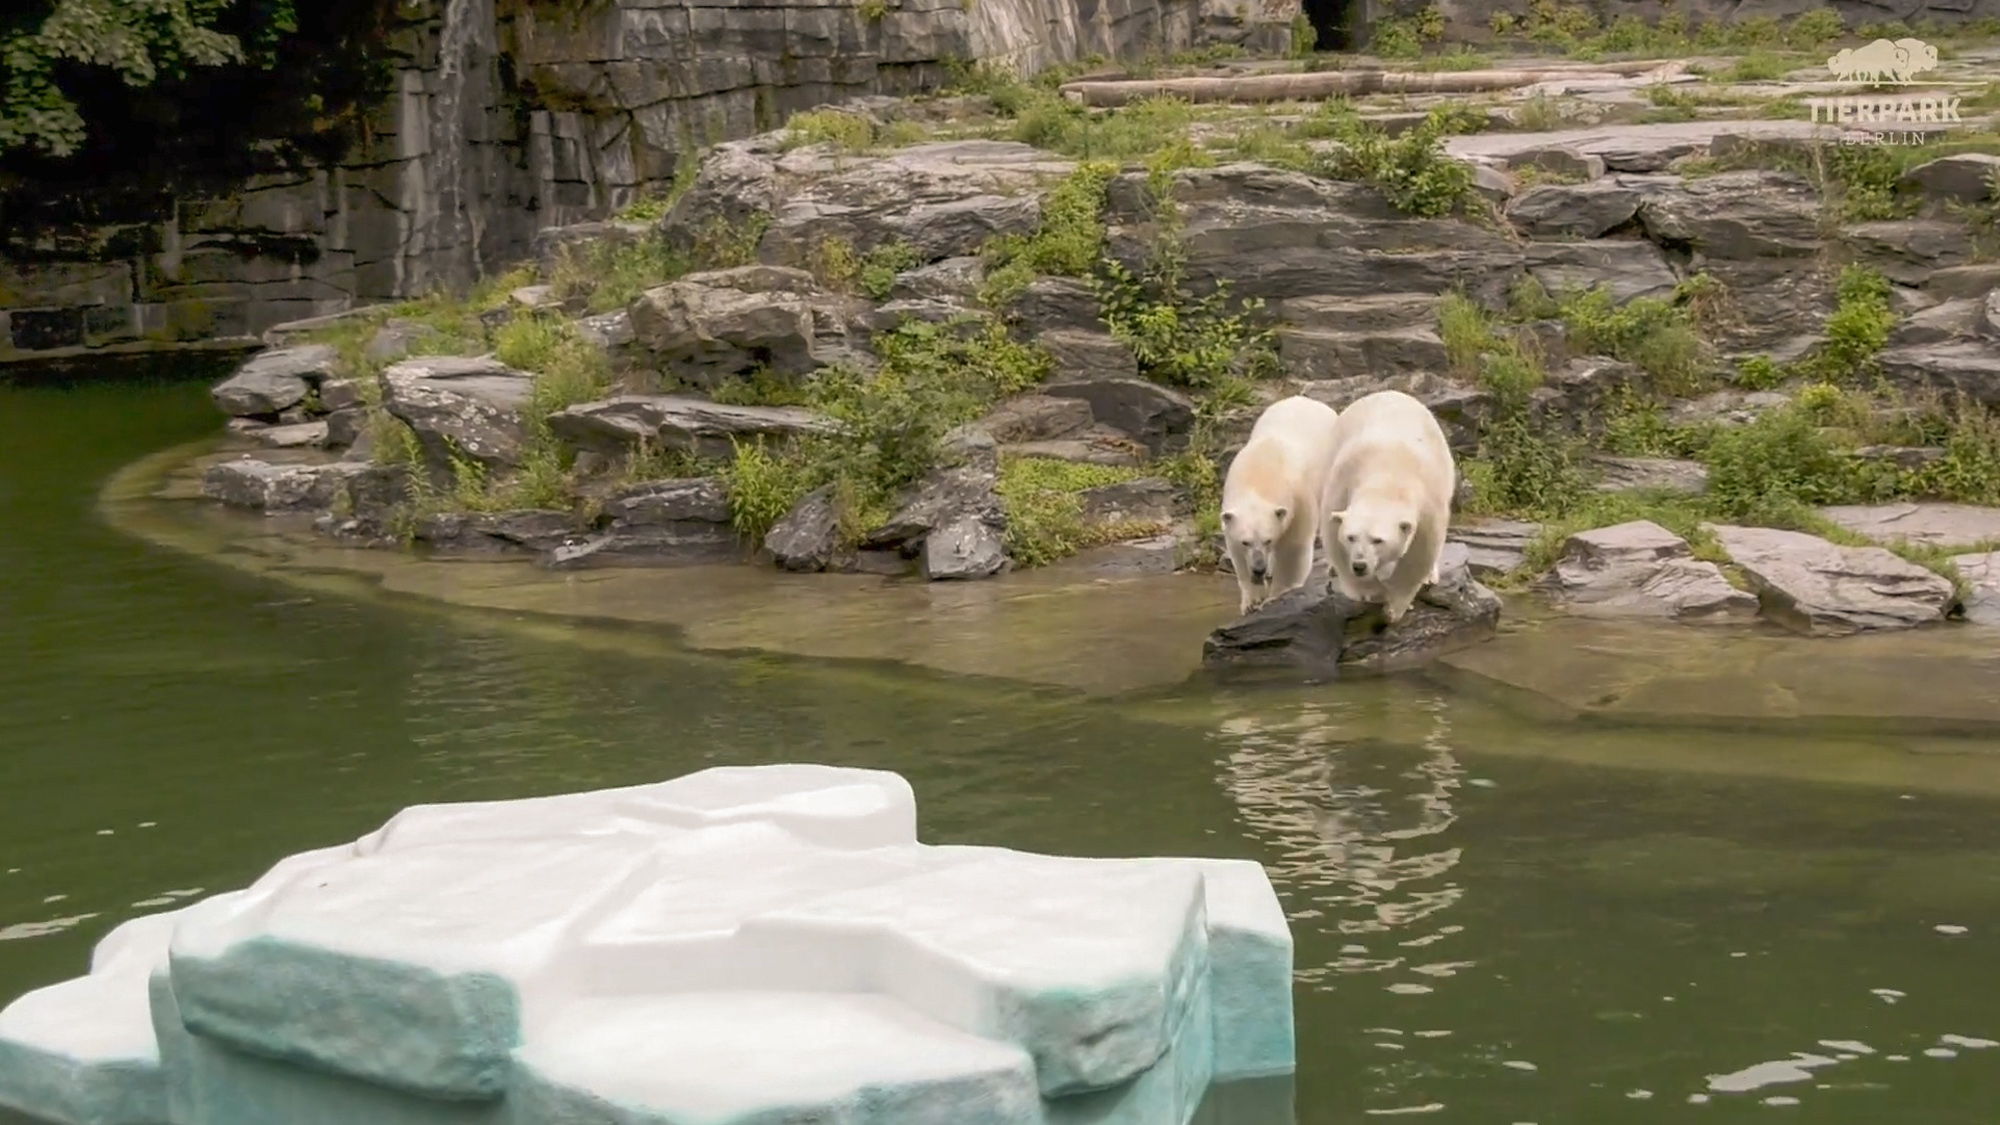 Polar bears named Hertha and Tonja prepare to jump into the water and explore the iceberg added for them at the Tierpark Berlin zoo in Germany. (Tierpark Berlin/Zenger)